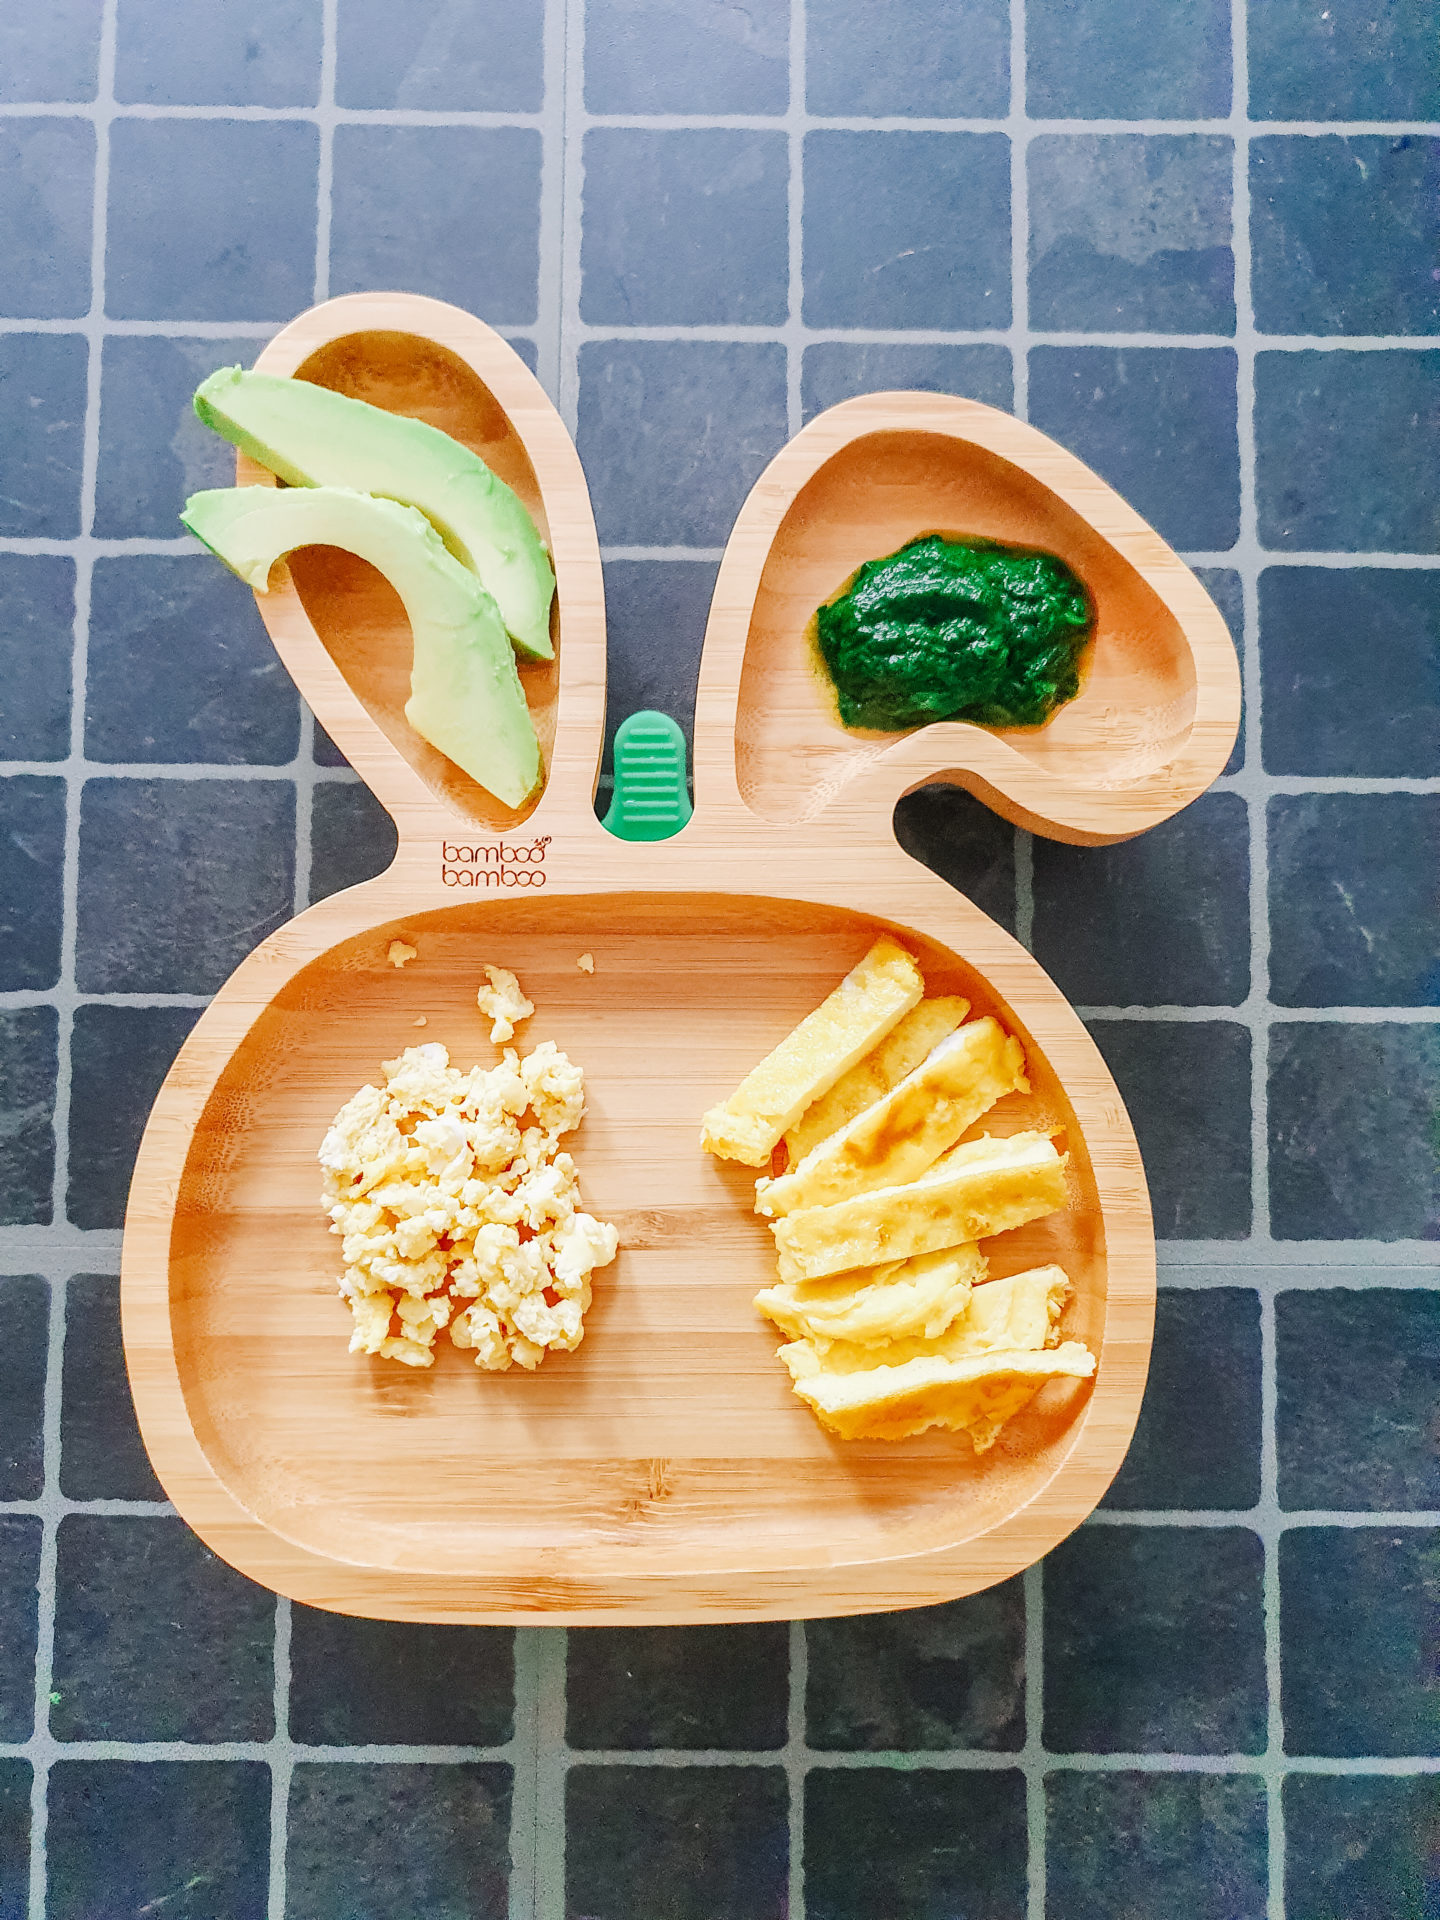 What I give my 6 month old for lunch Babyled weaning • Amy Pigott